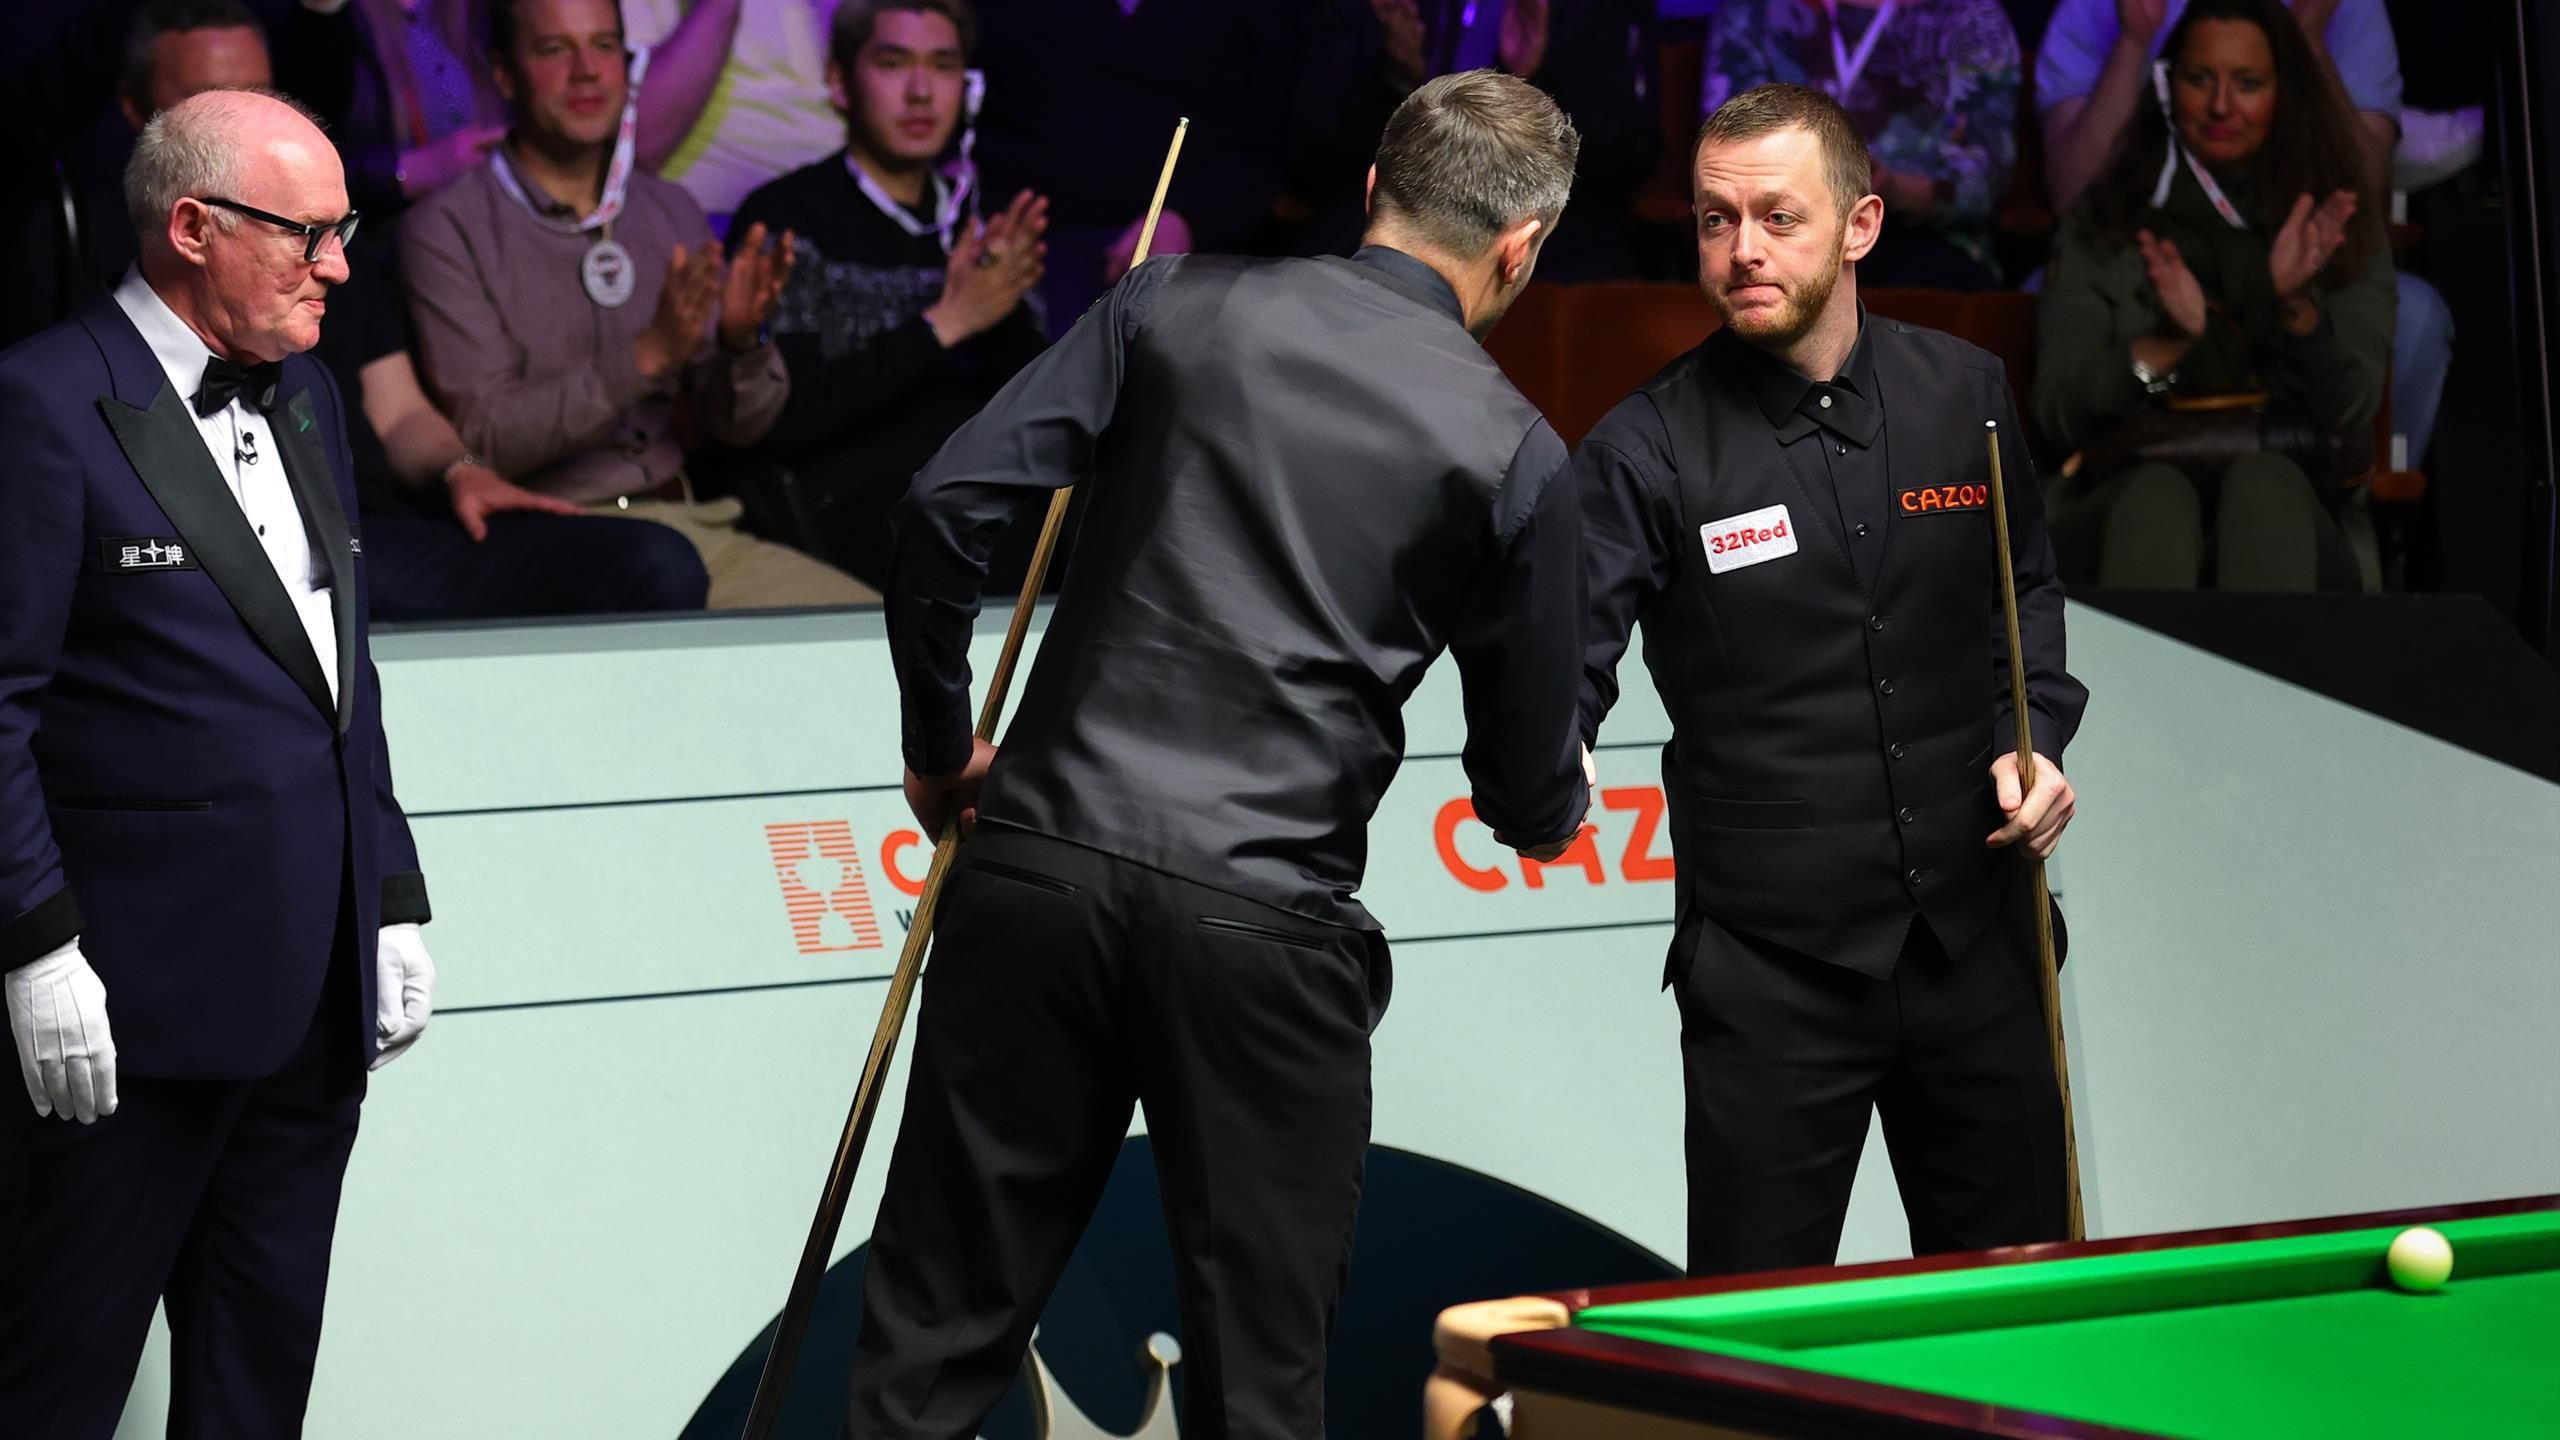 World Snooker Championship 2023 LIVE Mark Selby and Mark Allen do battle after Si Jiahui secures lead over Luca Brecel